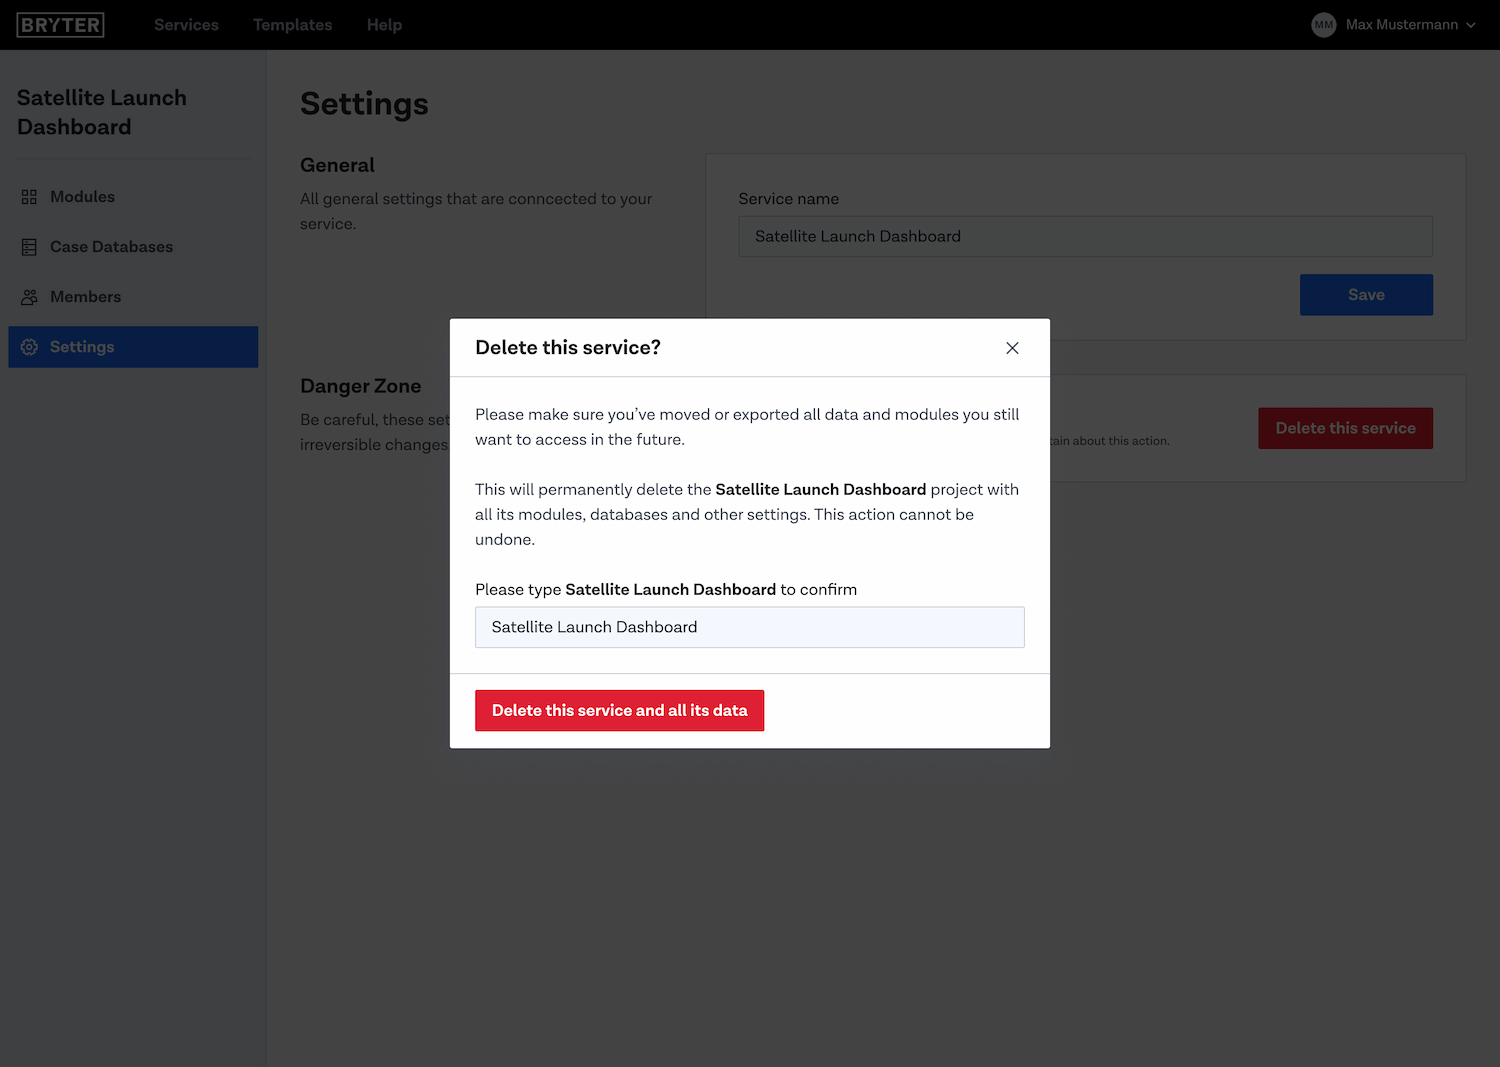 Screenshot from the Service deletion modal.